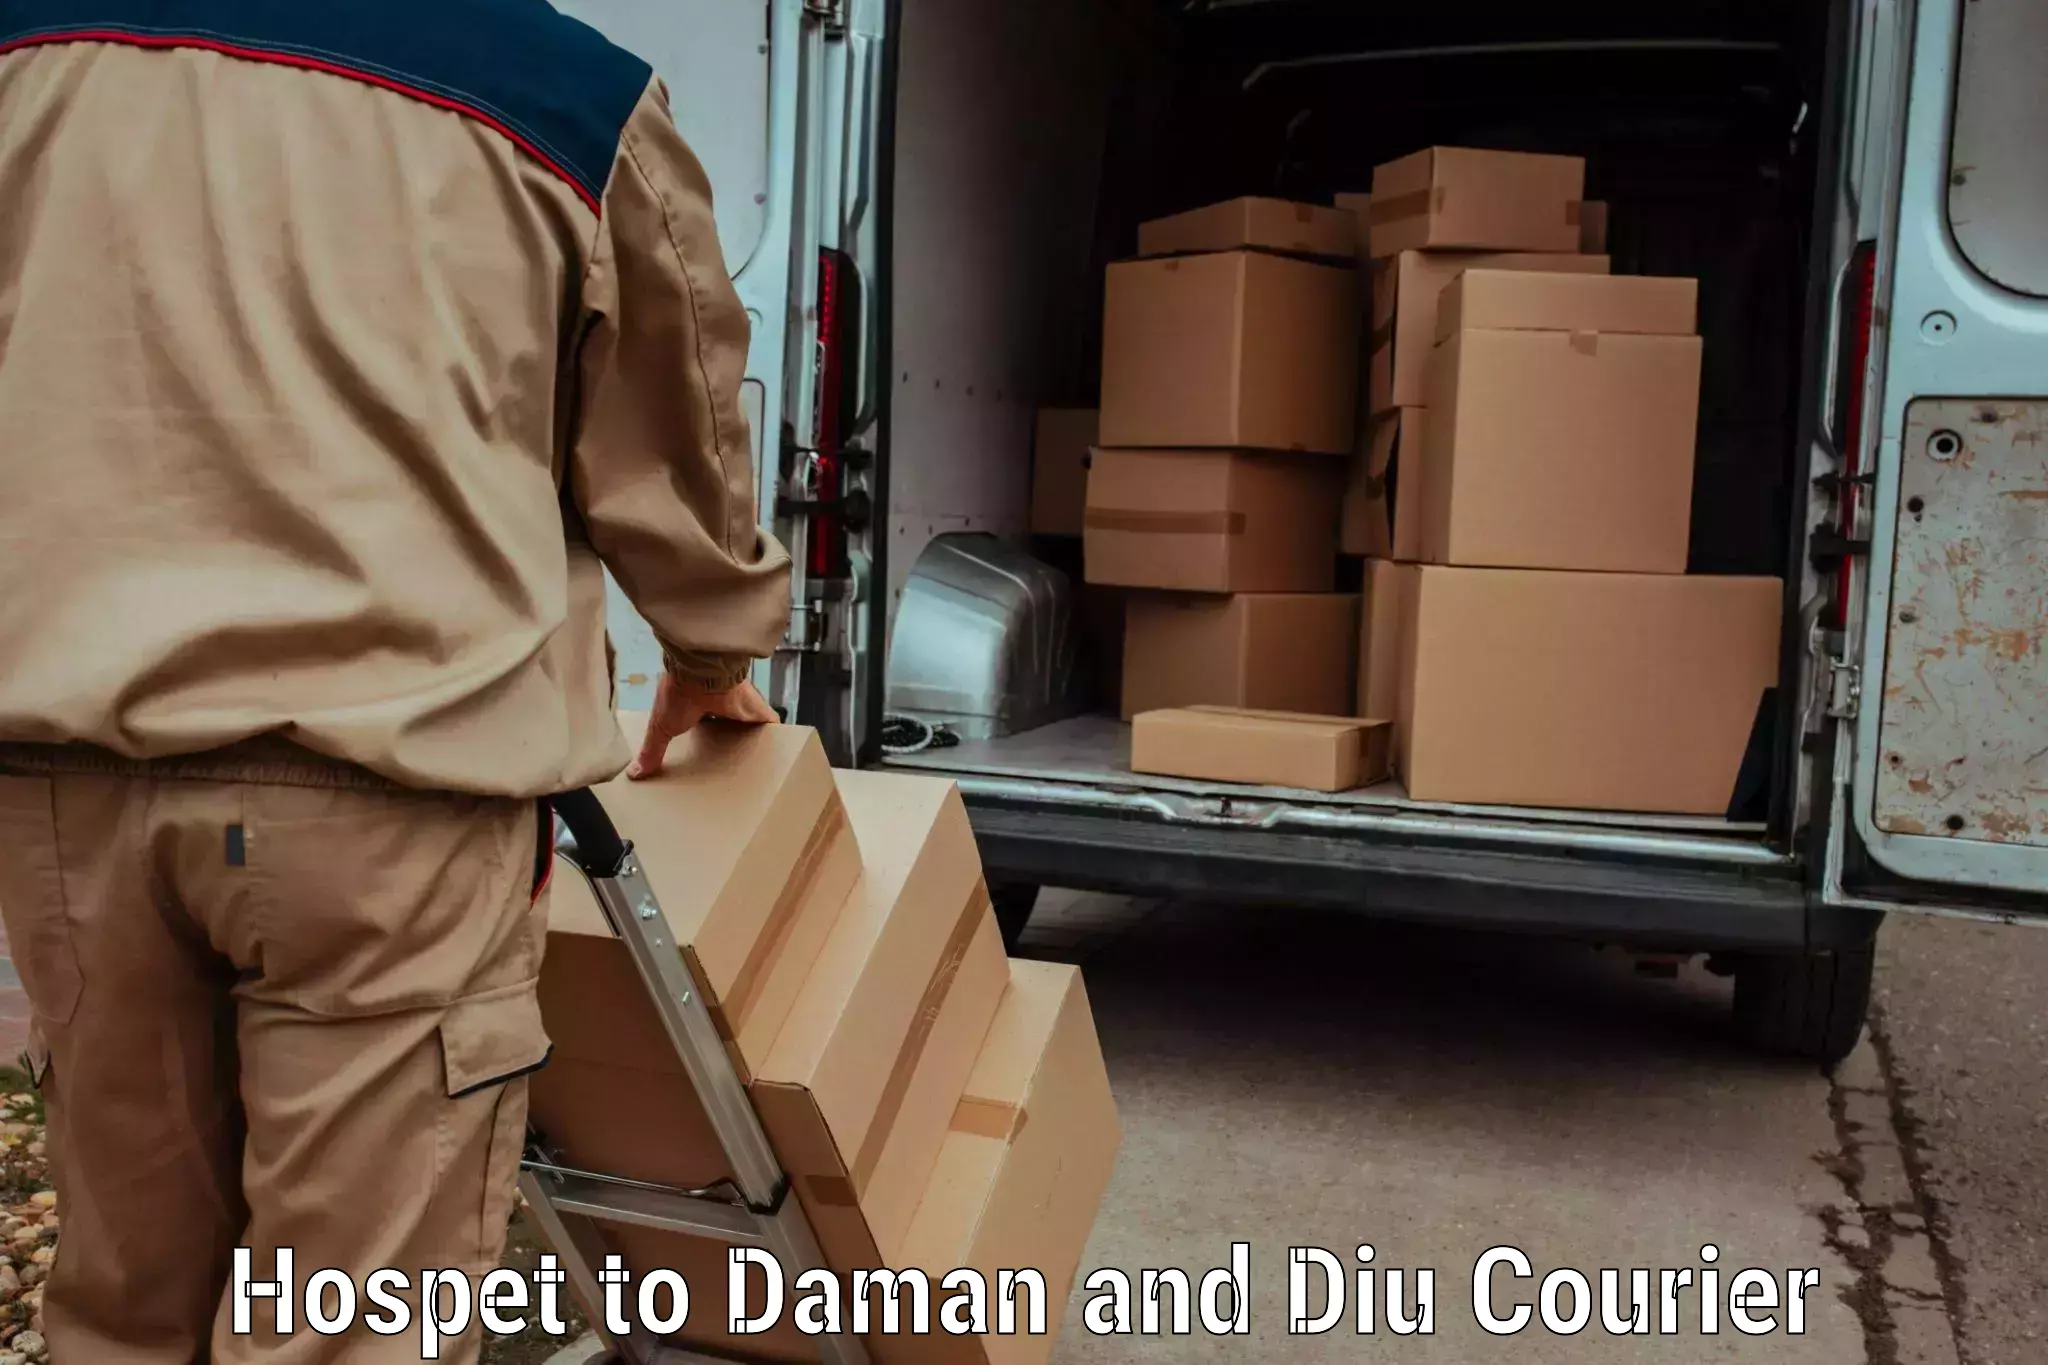 Weekend courier service Hospet to Daman and Diu